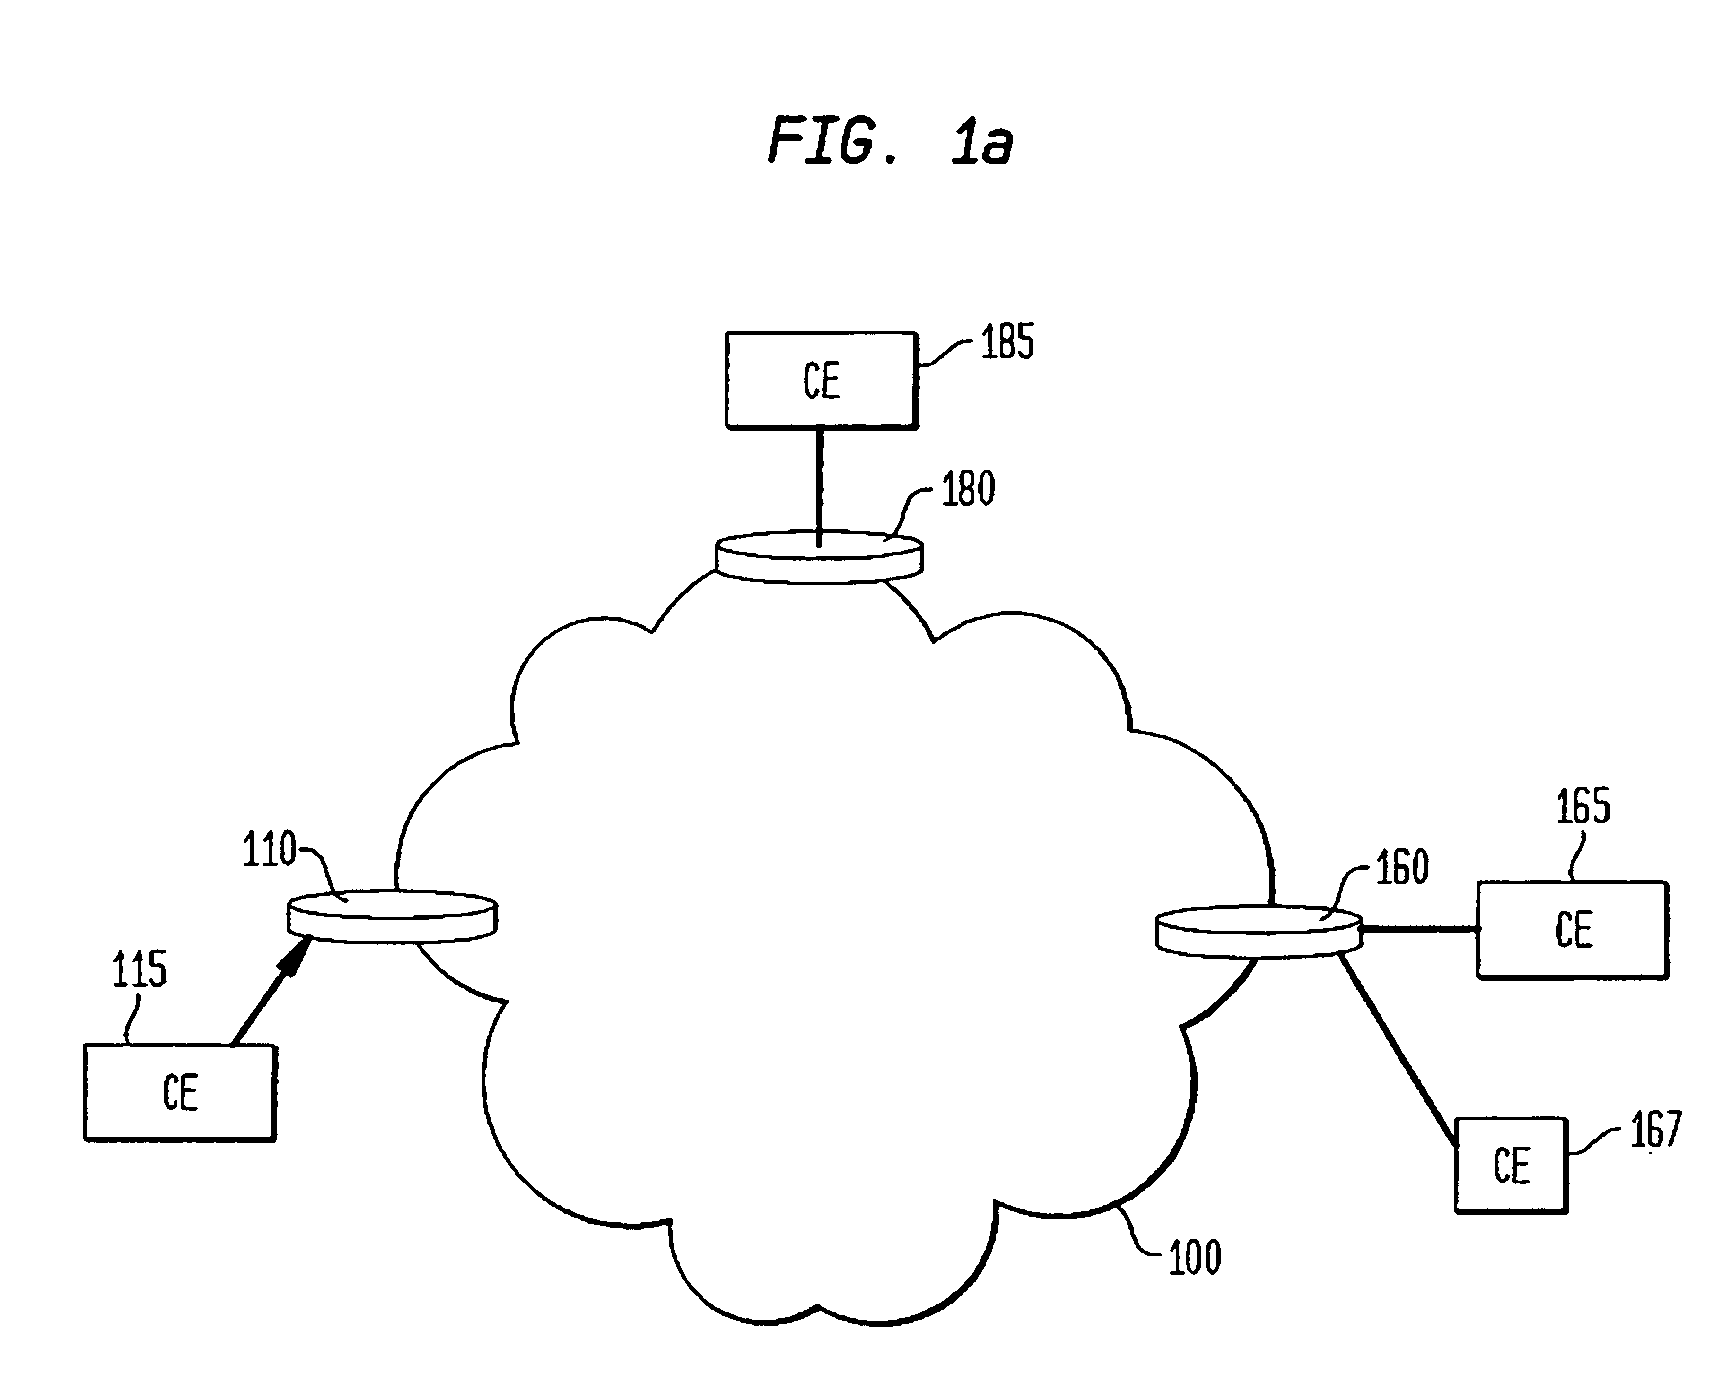 Method and apparatus for modeling and analyzing MPLS and virtual private networks